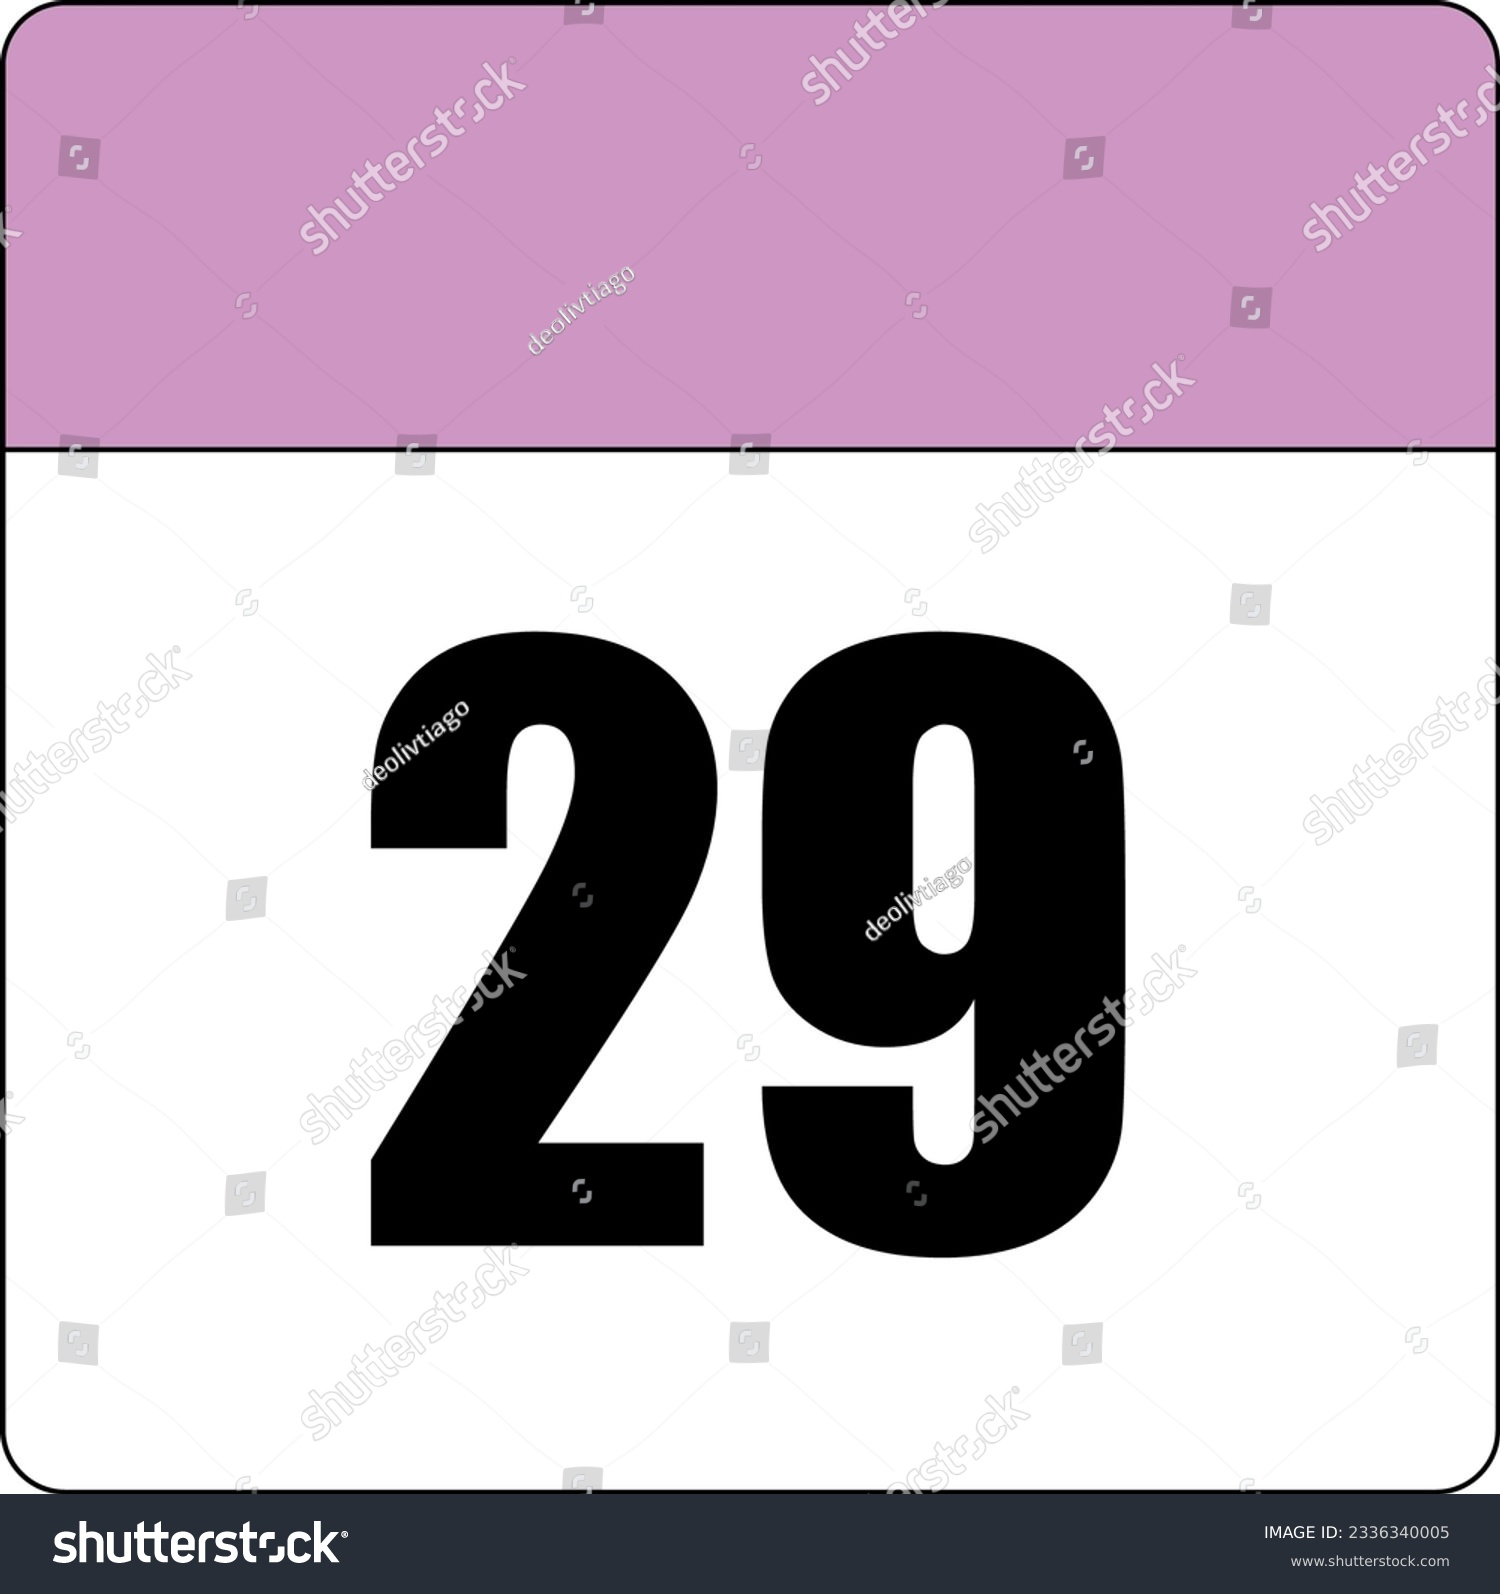 SVG of simple calendar icon with pink header and white background showing 29th day number twenty-nine svg